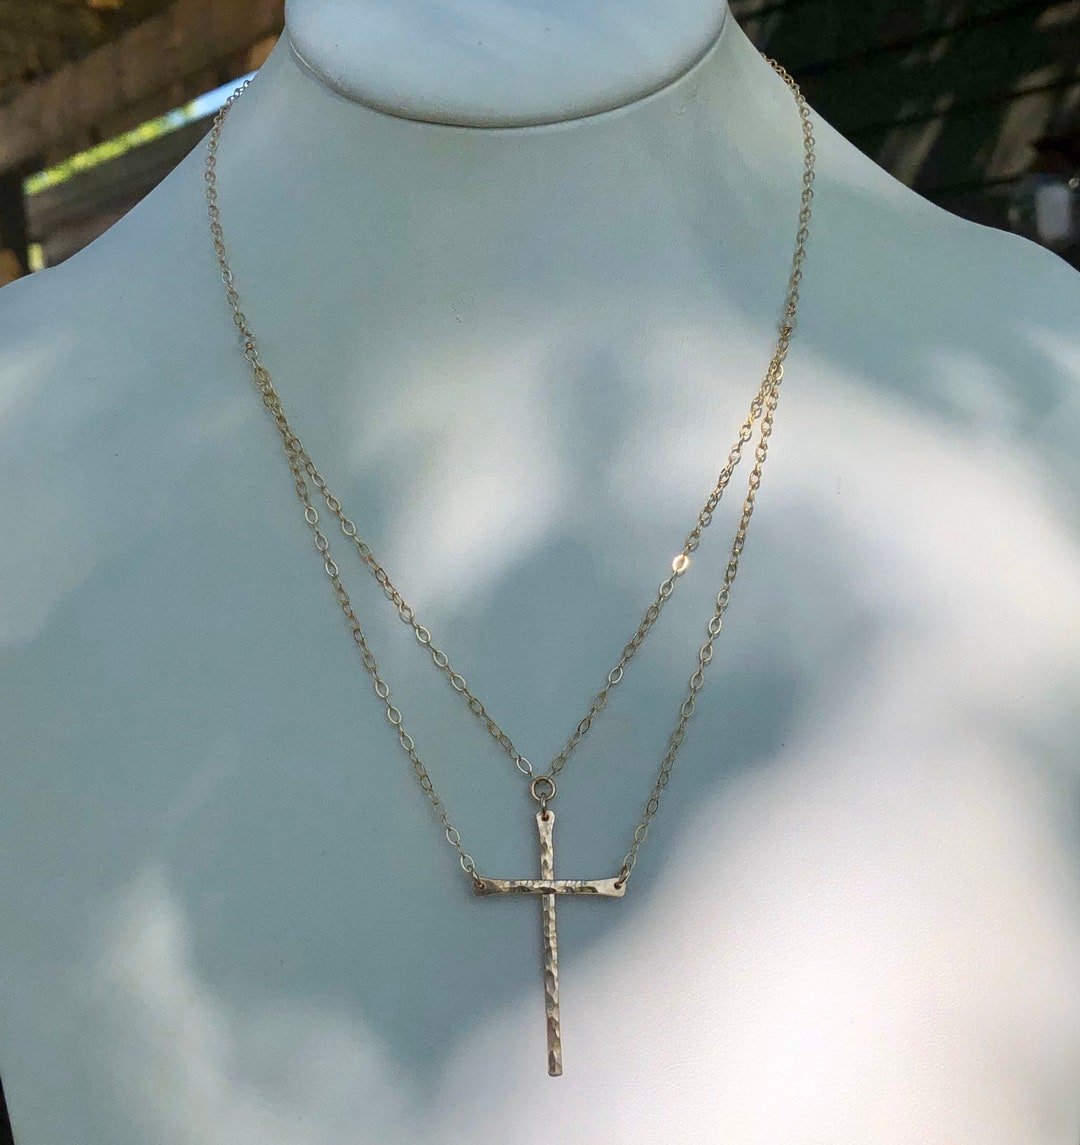 Original Be Still Two-piece Cross Necklace in Gold and Bronze - Etsy